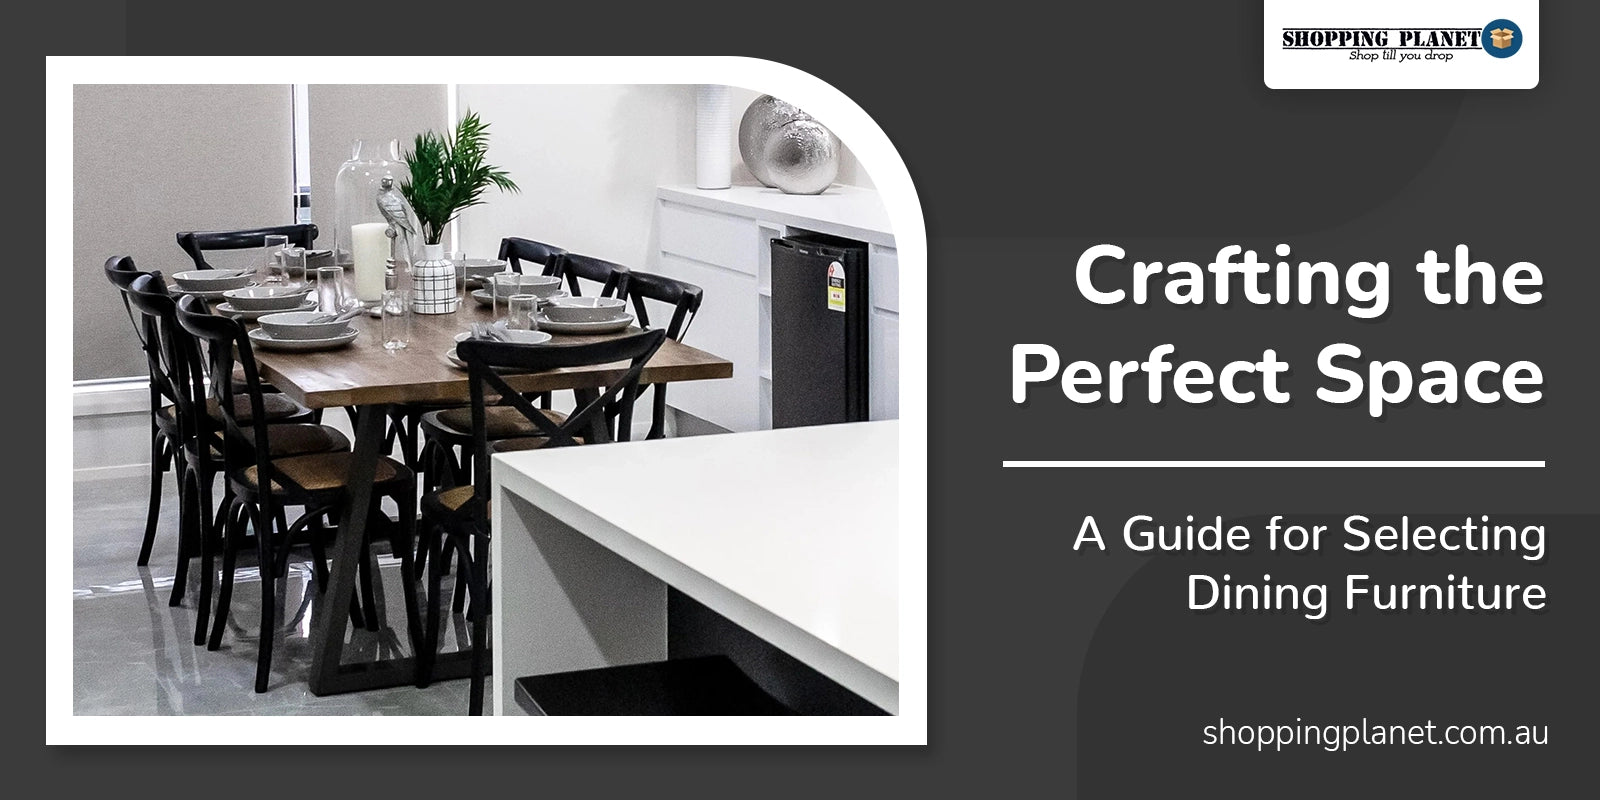 Crafting the Perfect Space: A Guide for Selecting Dining Furniture